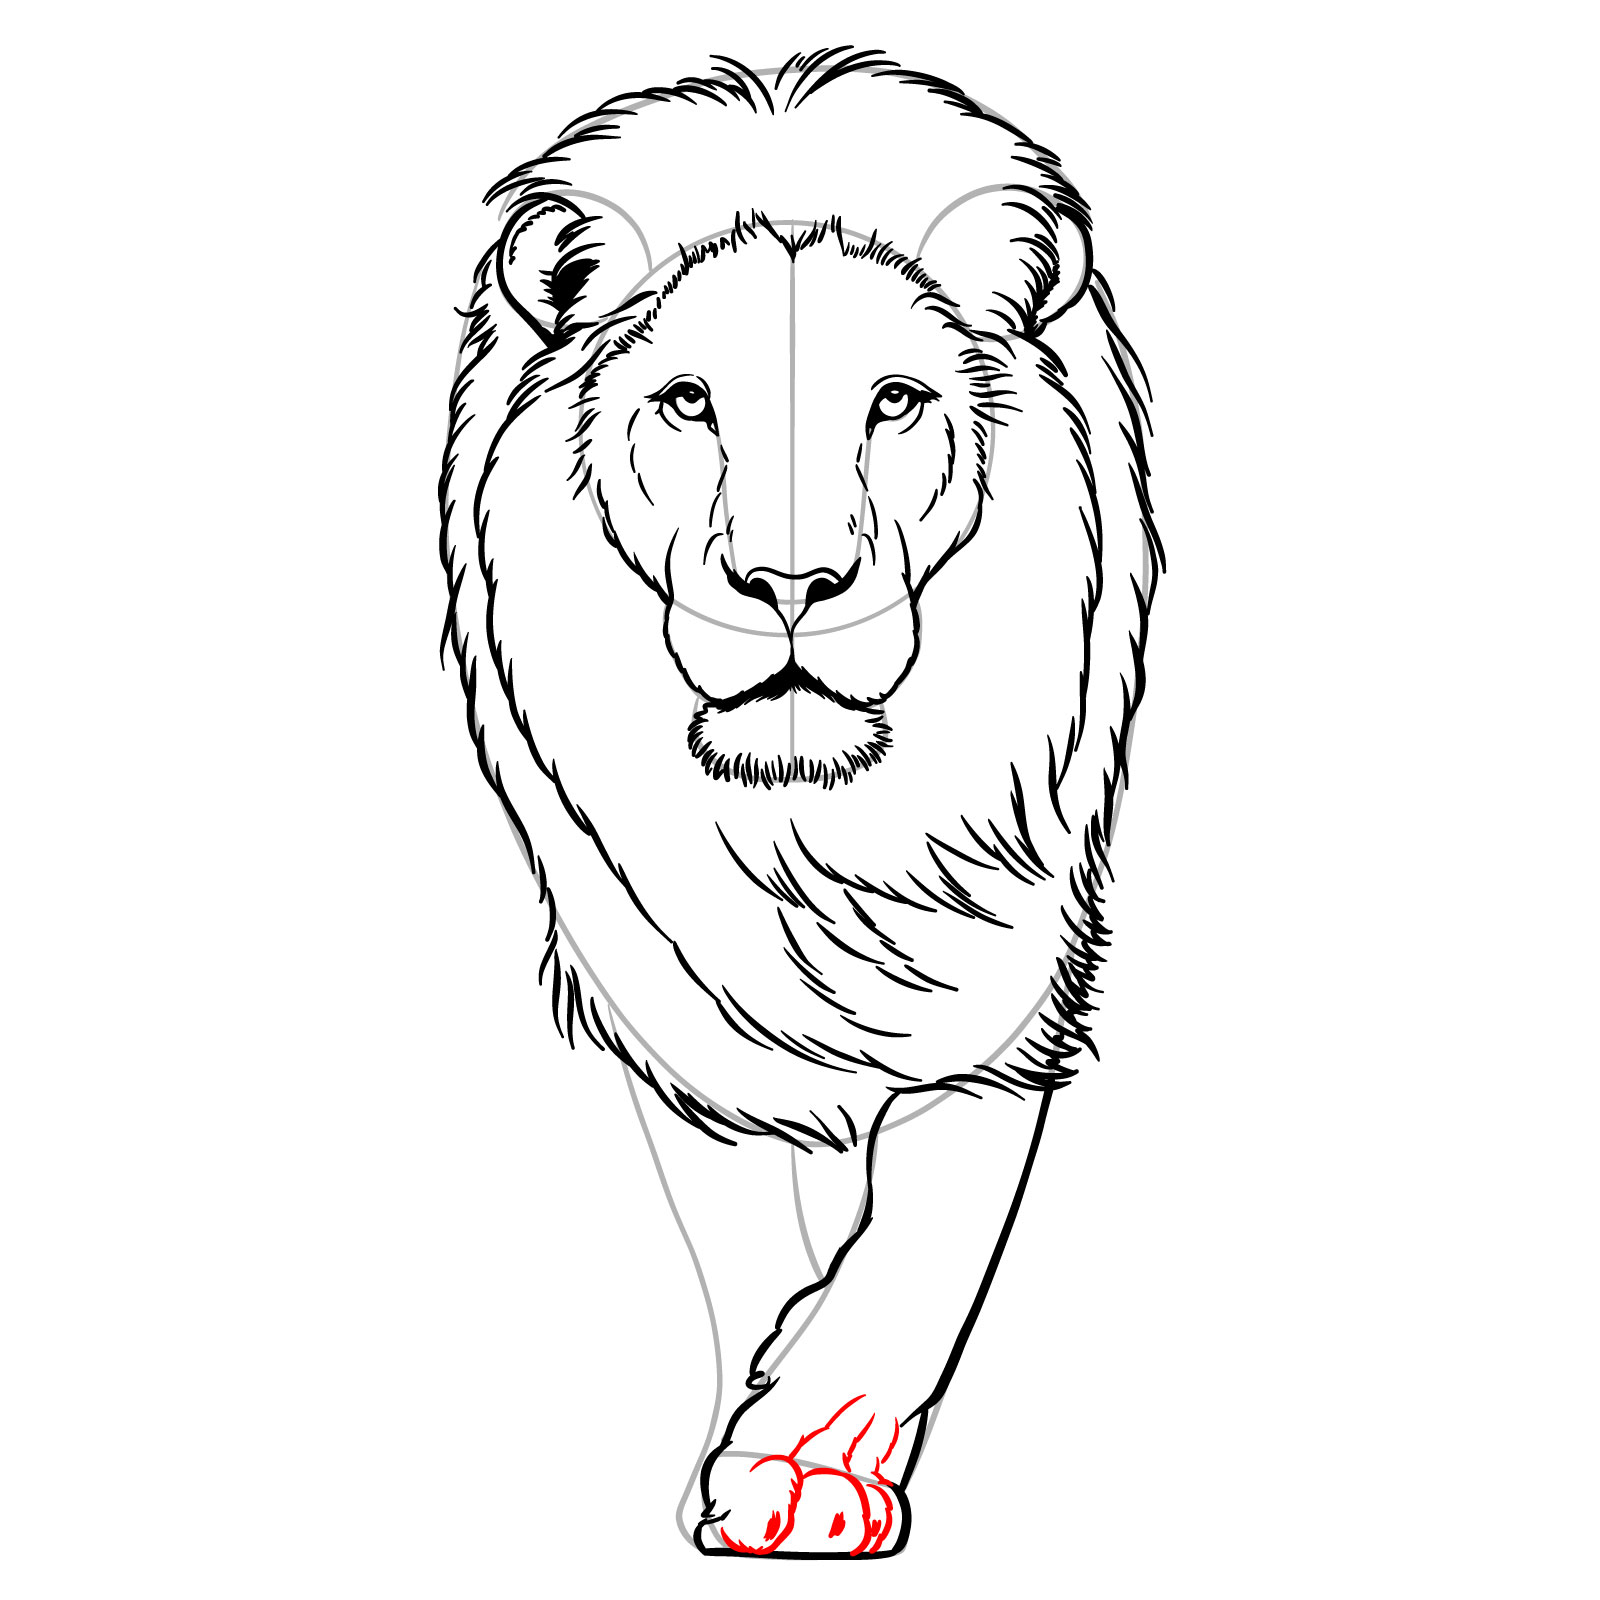 Sketching the paw, toes, and claws of a walking lion's front leg - step 11